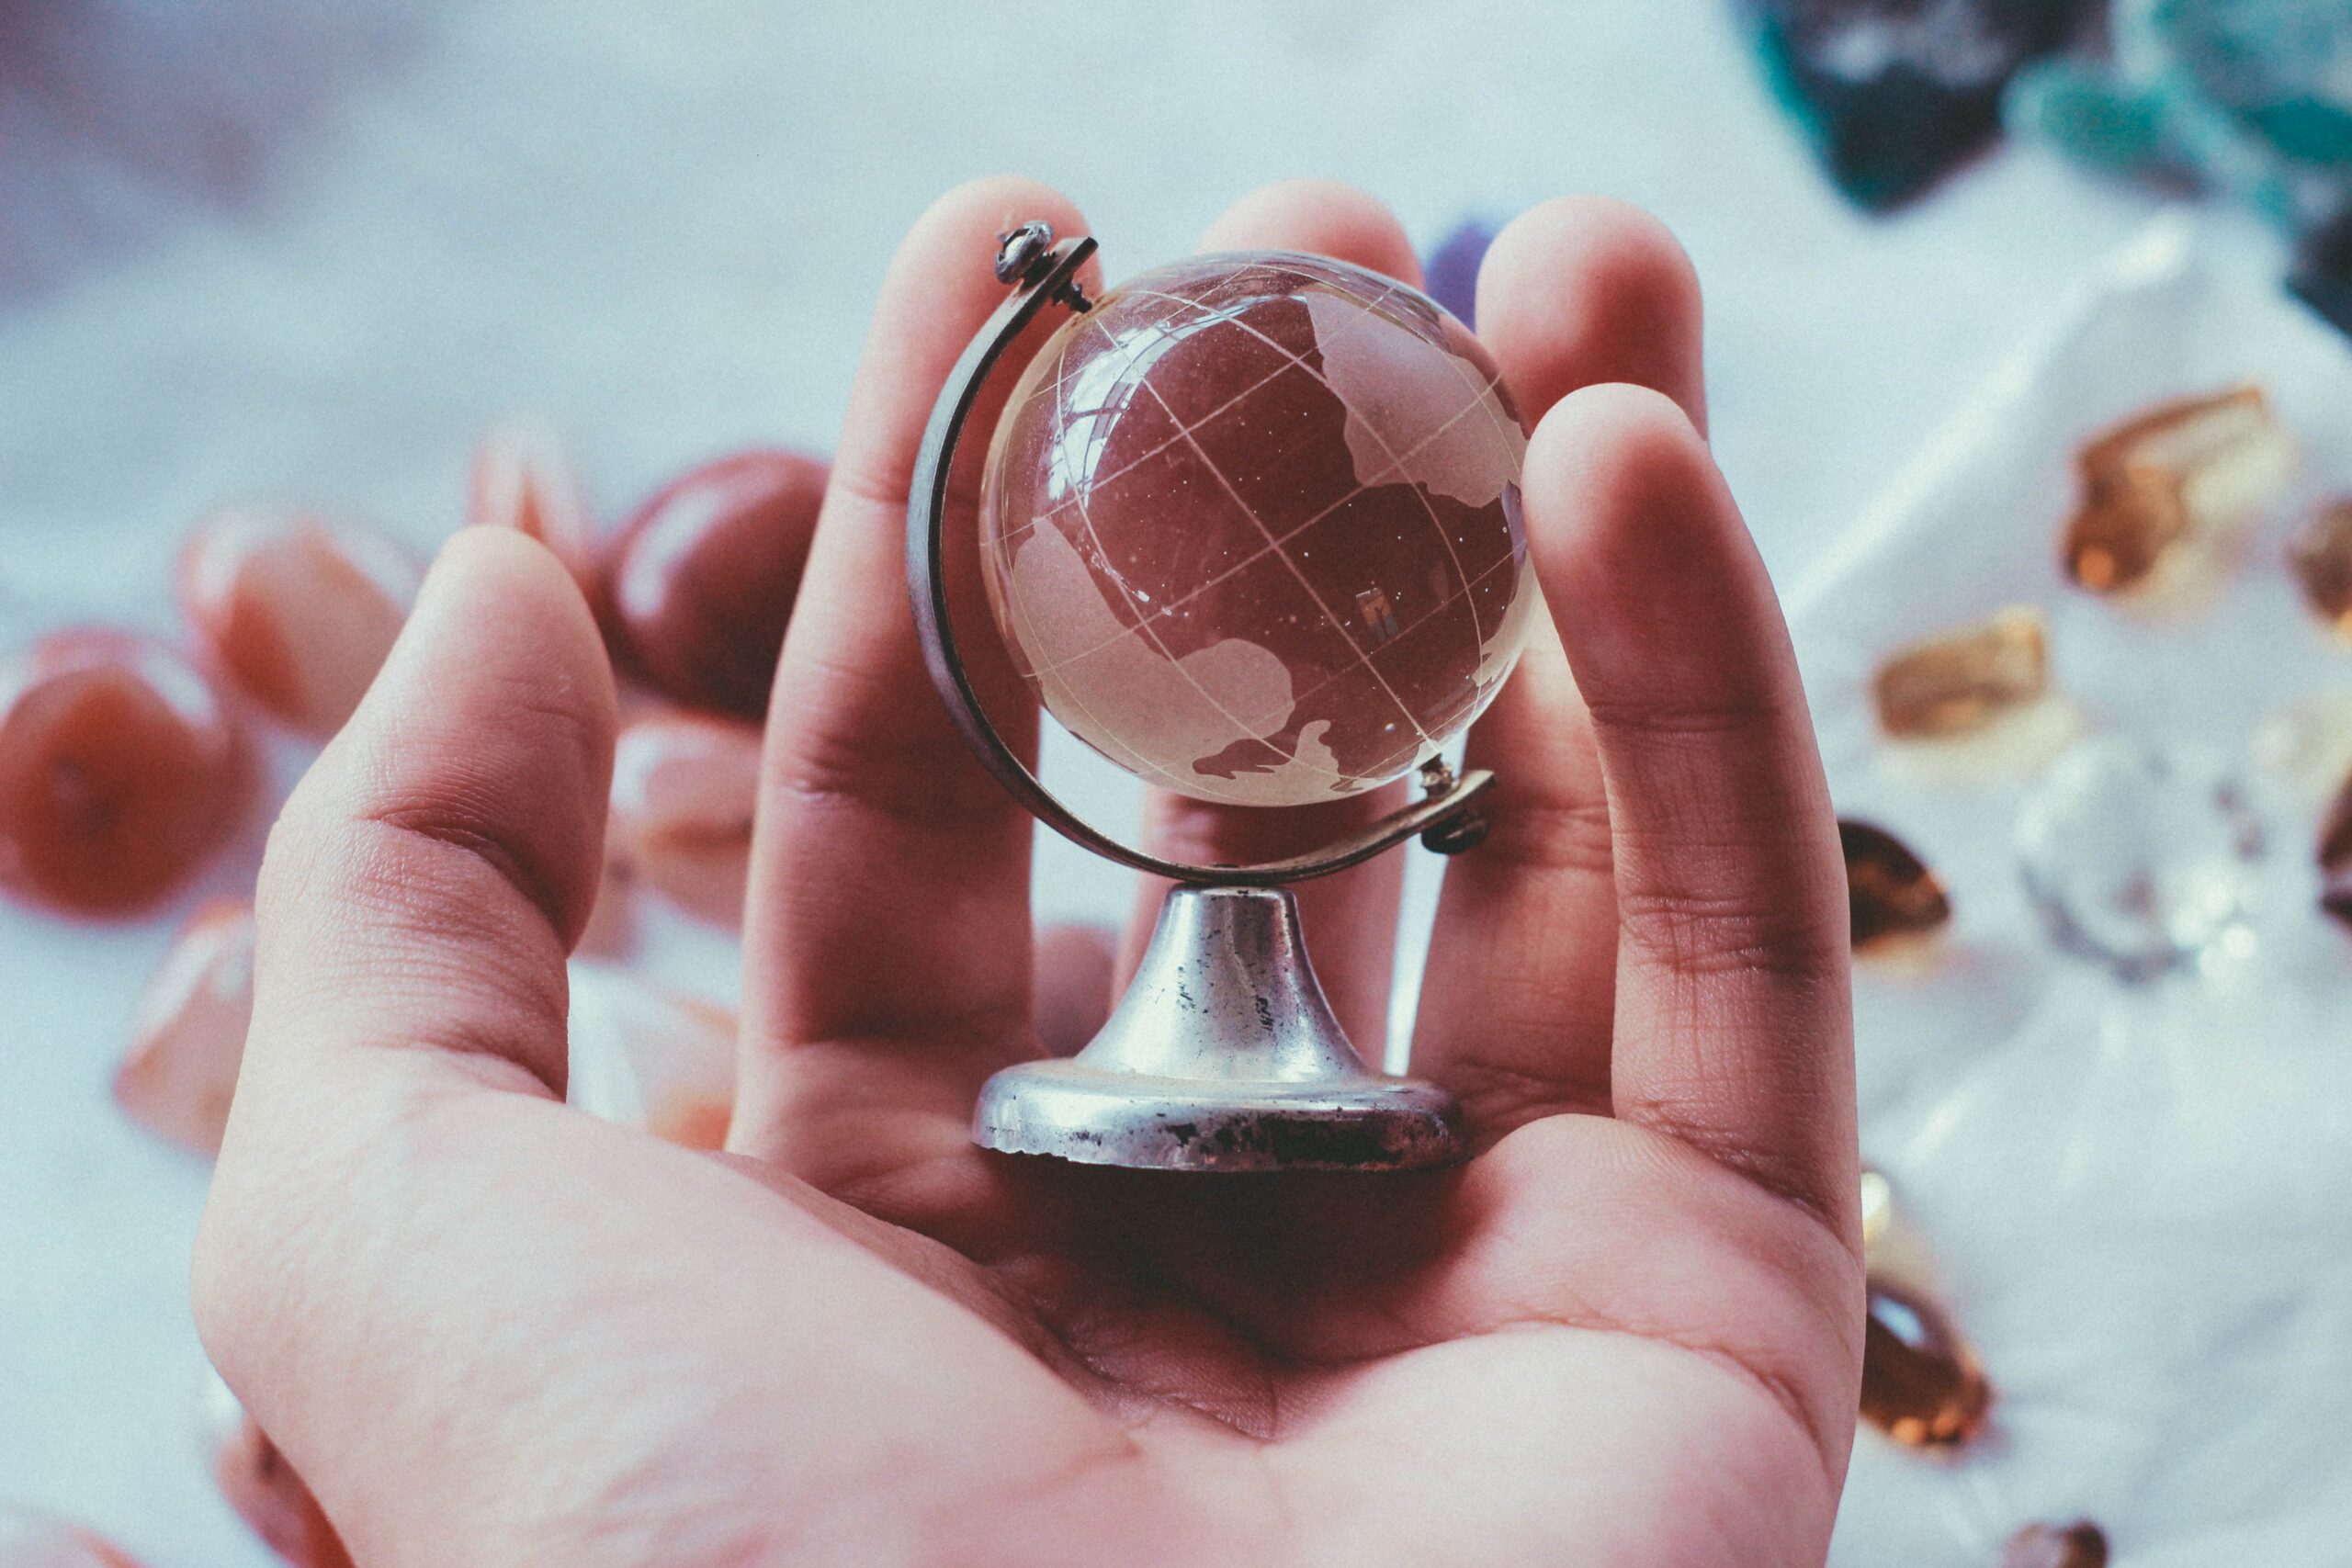 Hand holding a small glass globe